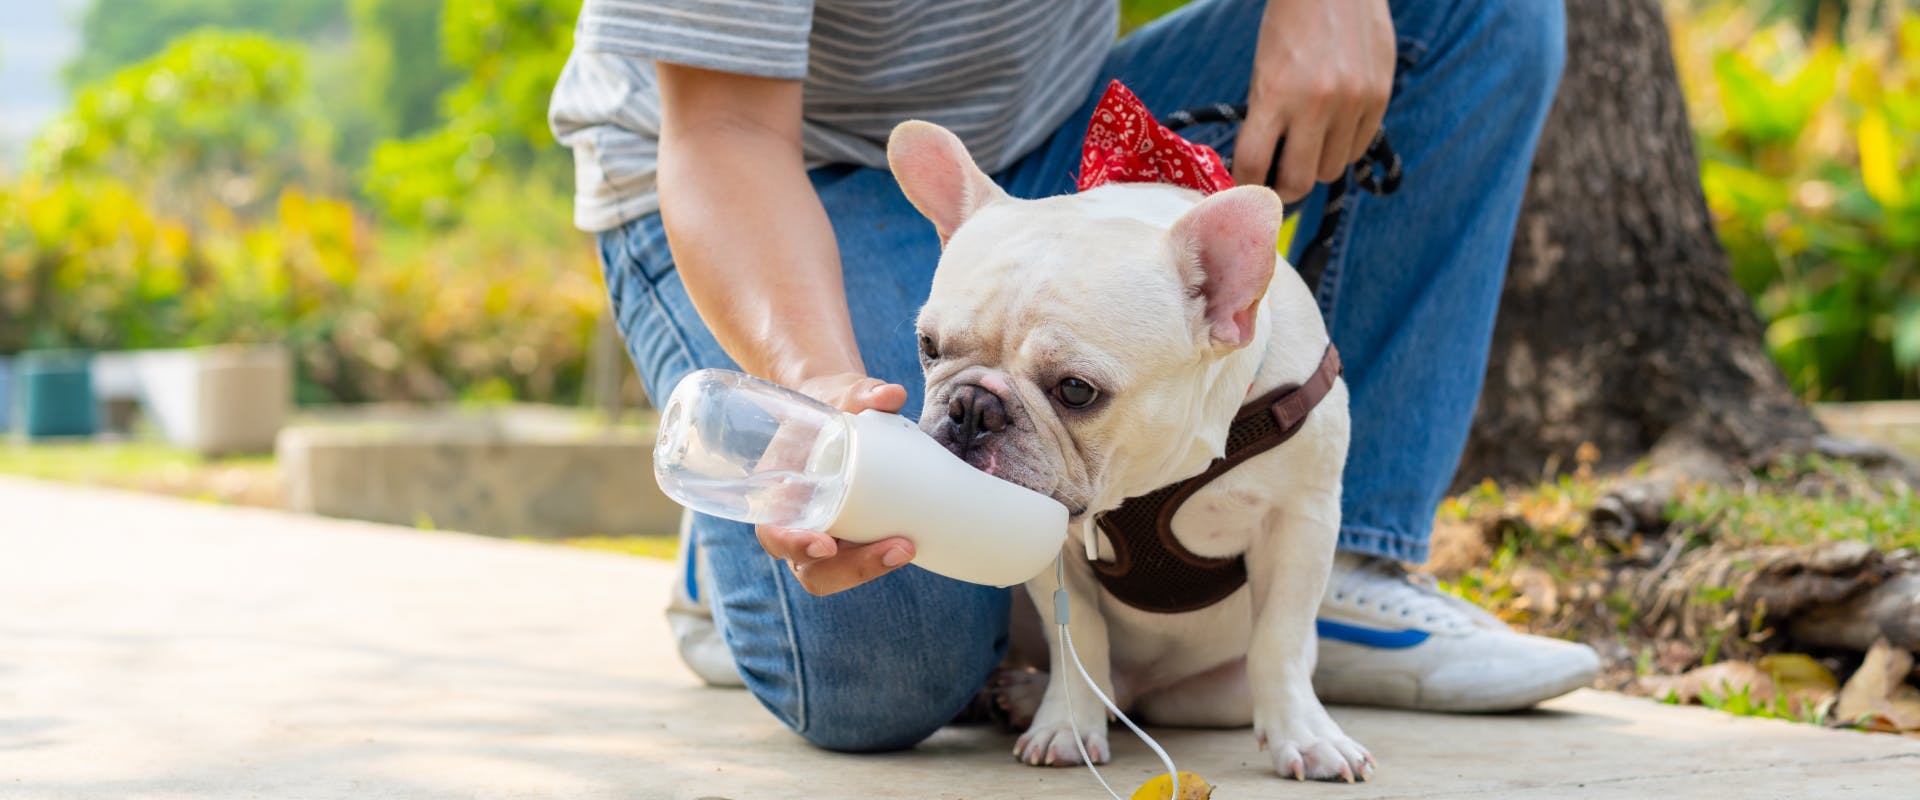 french bulldog drinking from a dog waterbottle